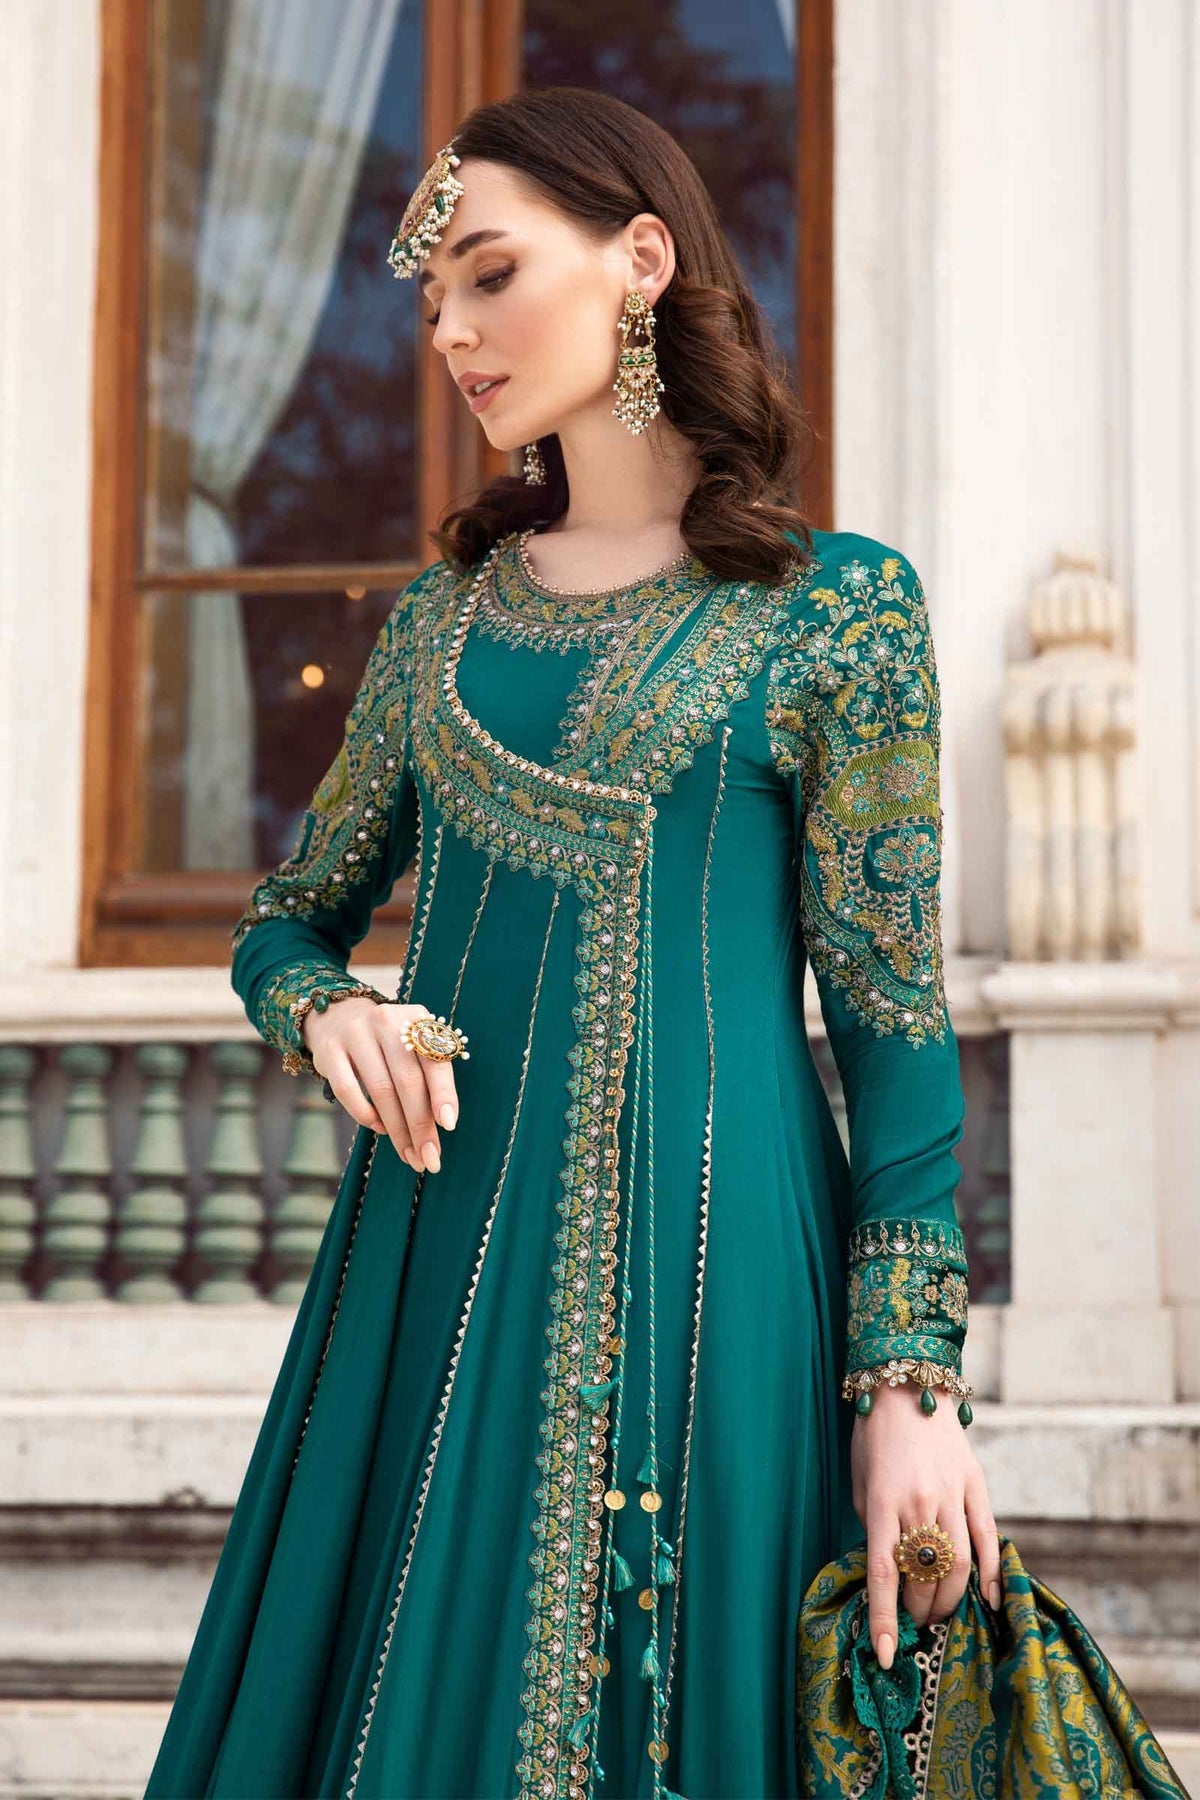 Maria. B 03 Piece Unstitched Embroidered Linen Suit - DL-1107 Emerald Green